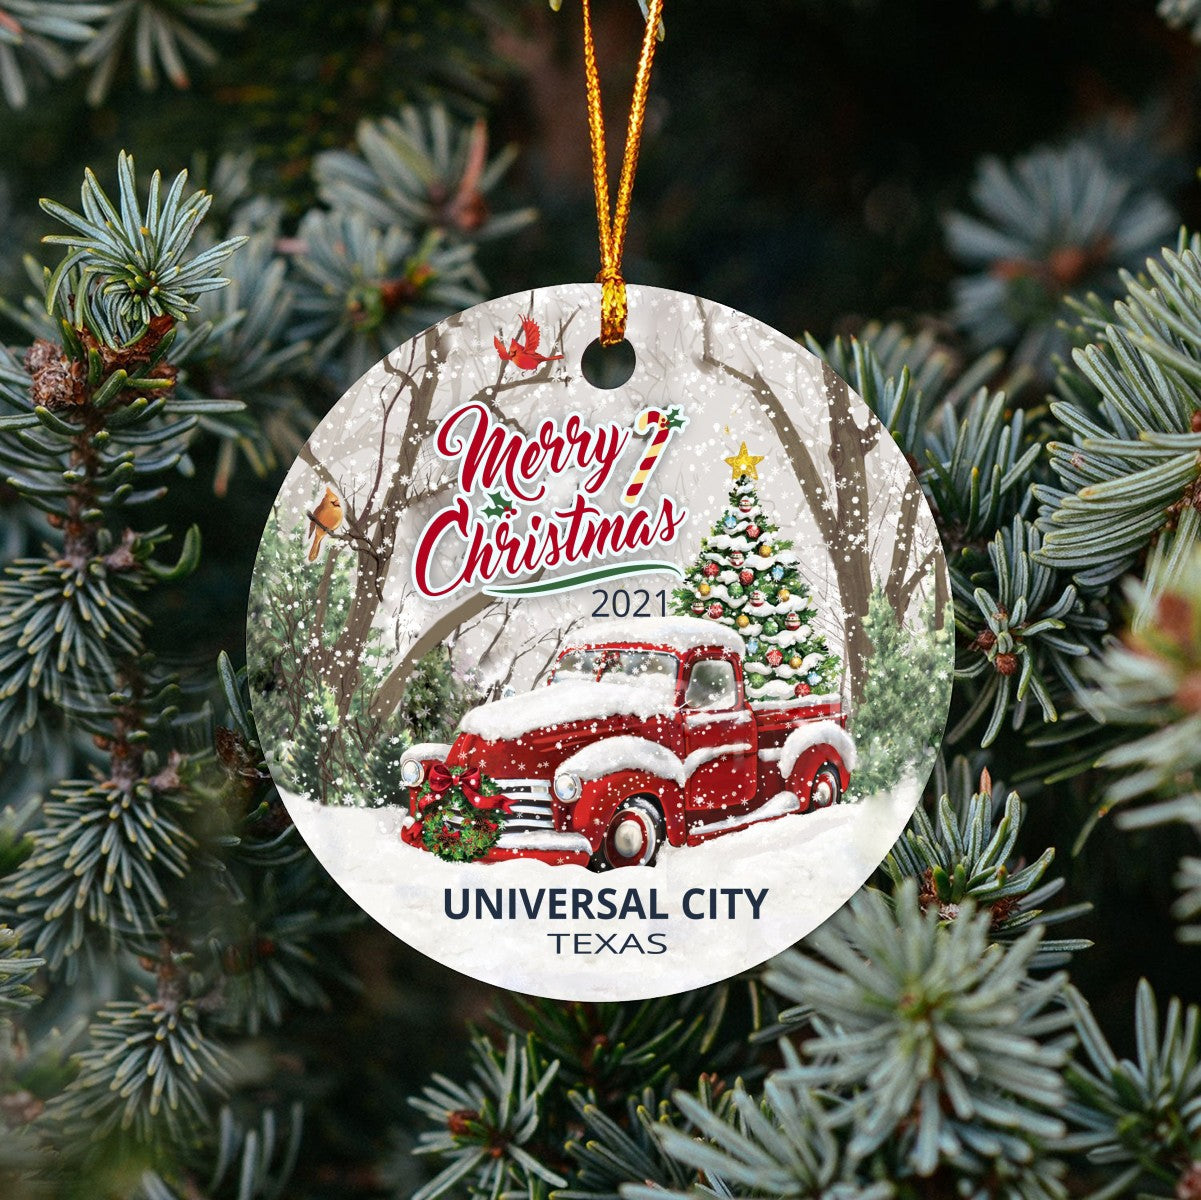 Christmas Tree Ornaments Universal City - Ornament With Name City, State Universal City Texas TX Ornament - Red Truck Xmas Ornaments 3'' Plastic Gift For Family, Friend And Housewarming